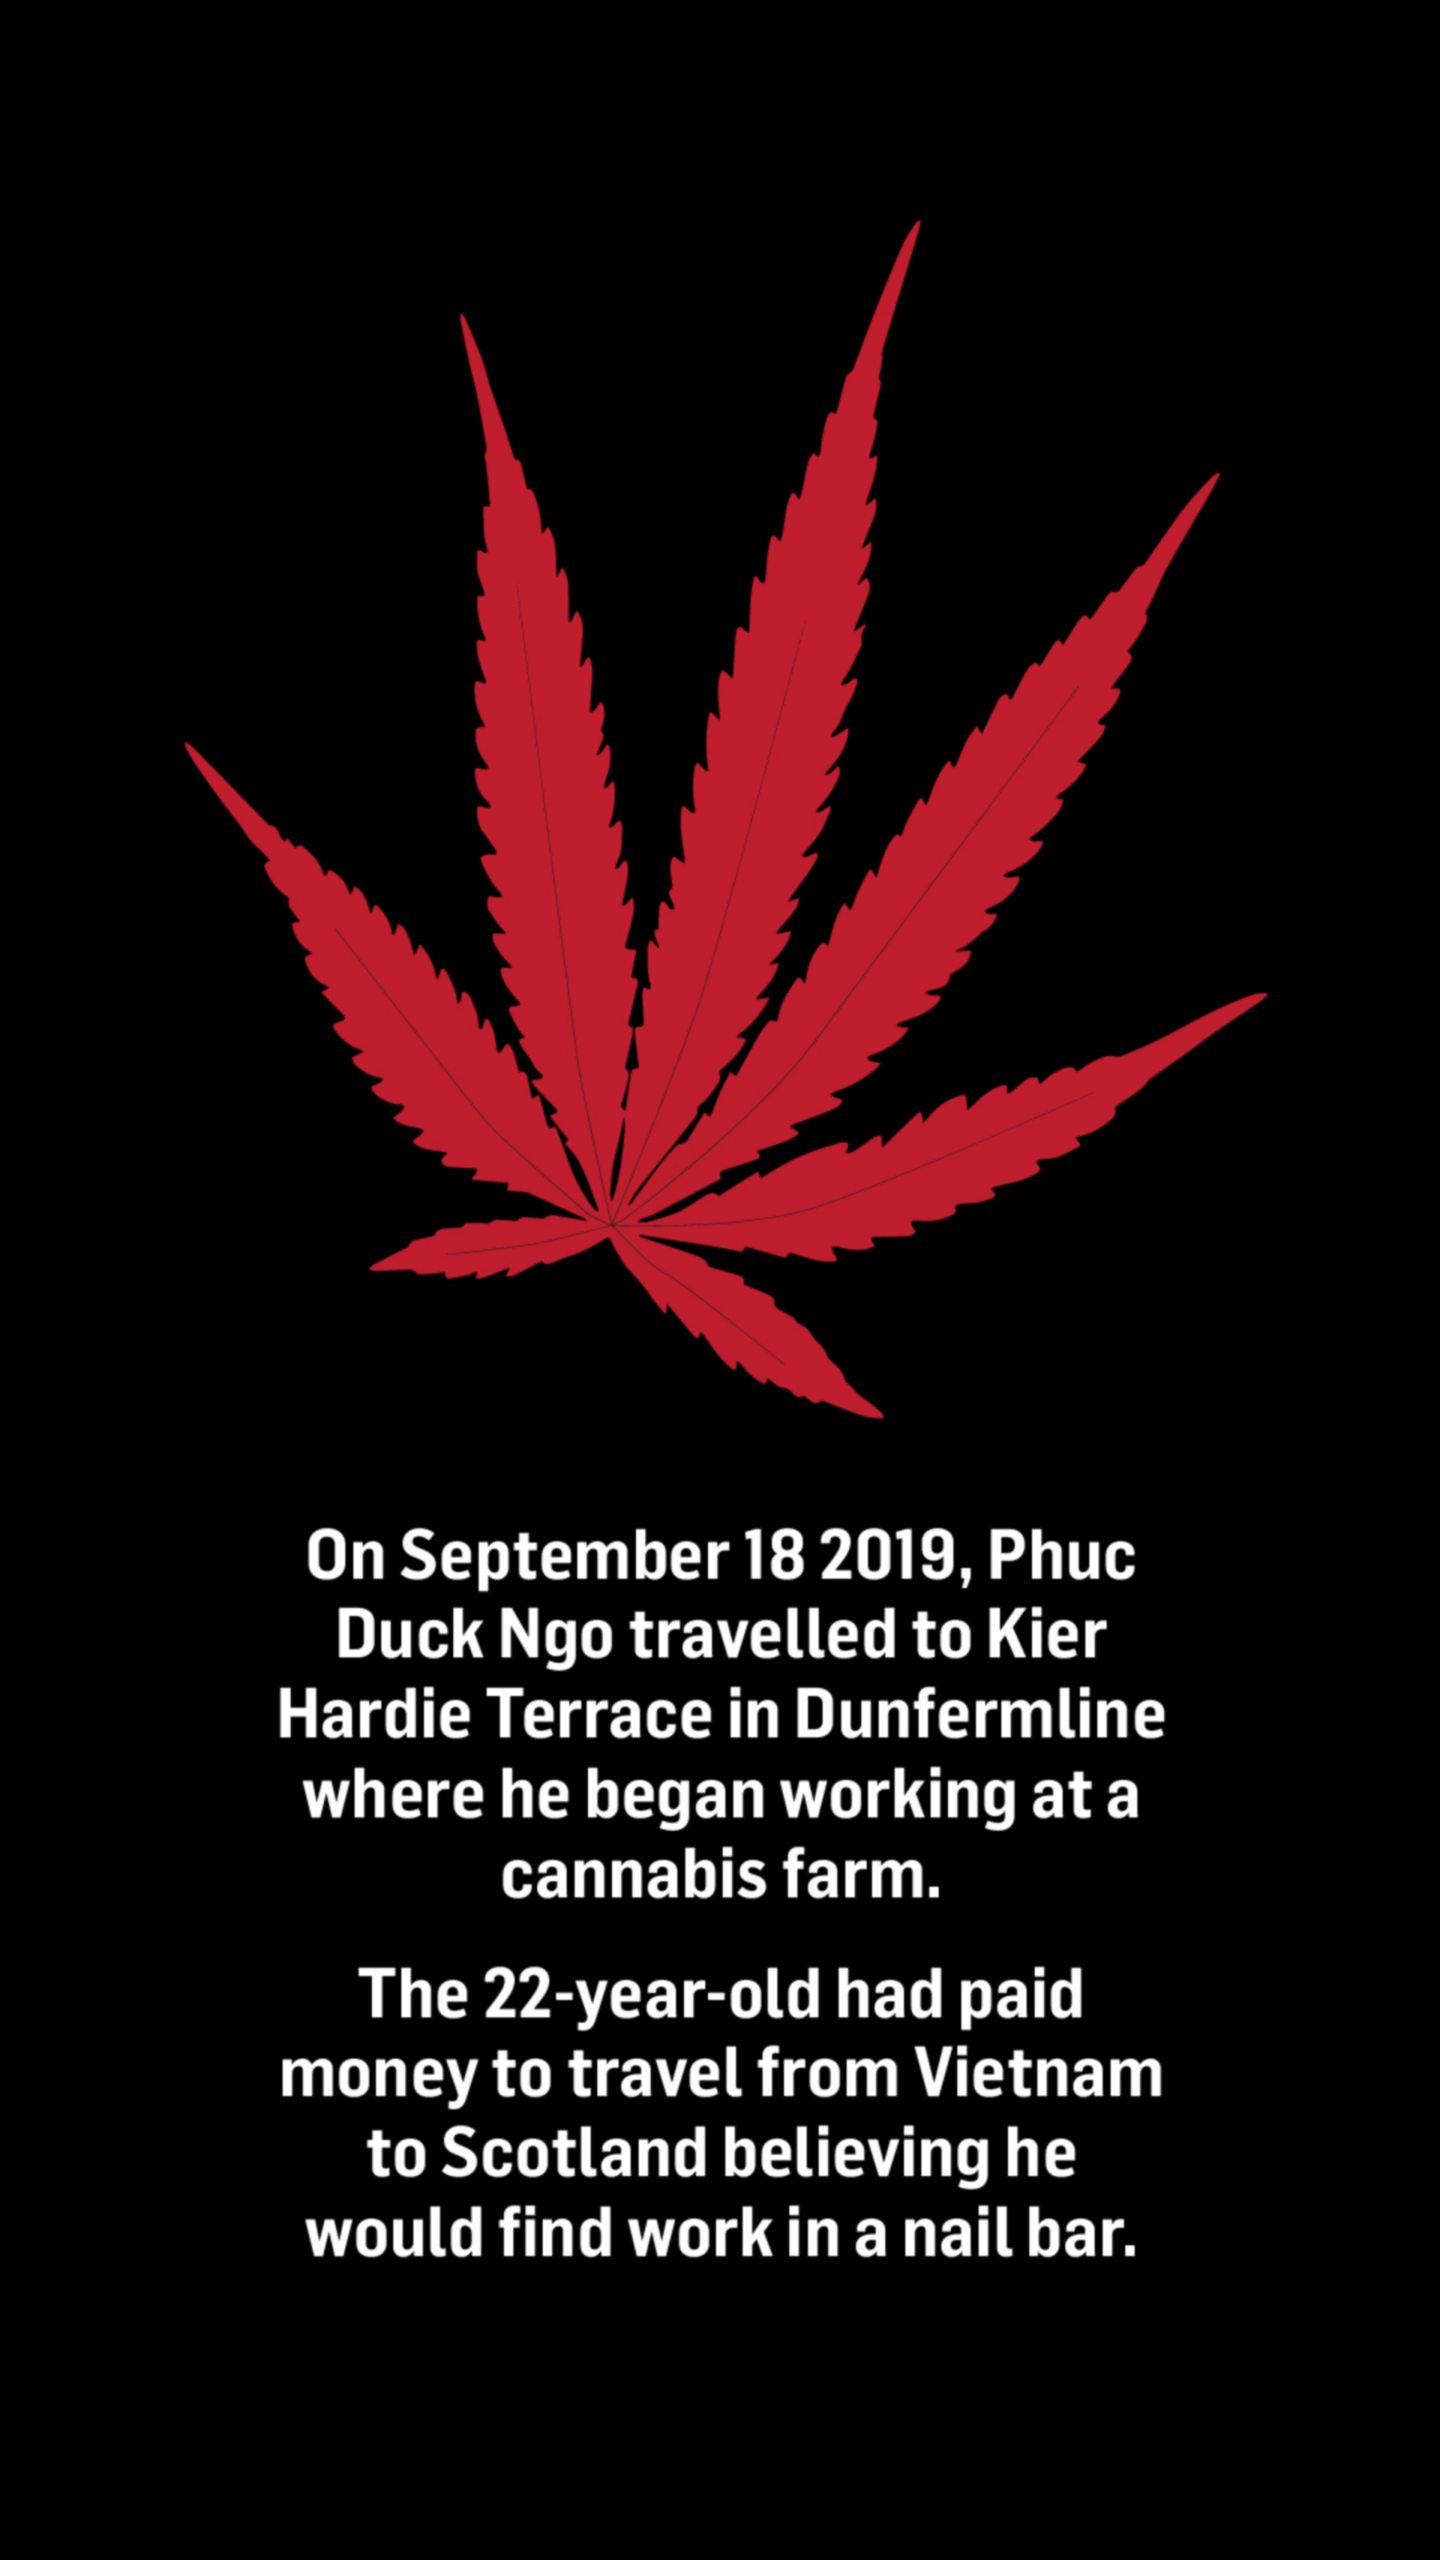 A cannabis plant above text which reads: On September 18, 2019, Phuc Duck Ngo travelled to Kier Hardie Terrace in Dunfermline where he began working at a cannabis farm. The 22-year-old had paid money to travel from Vietnam to Scotland believing he would find work in a nail bar.